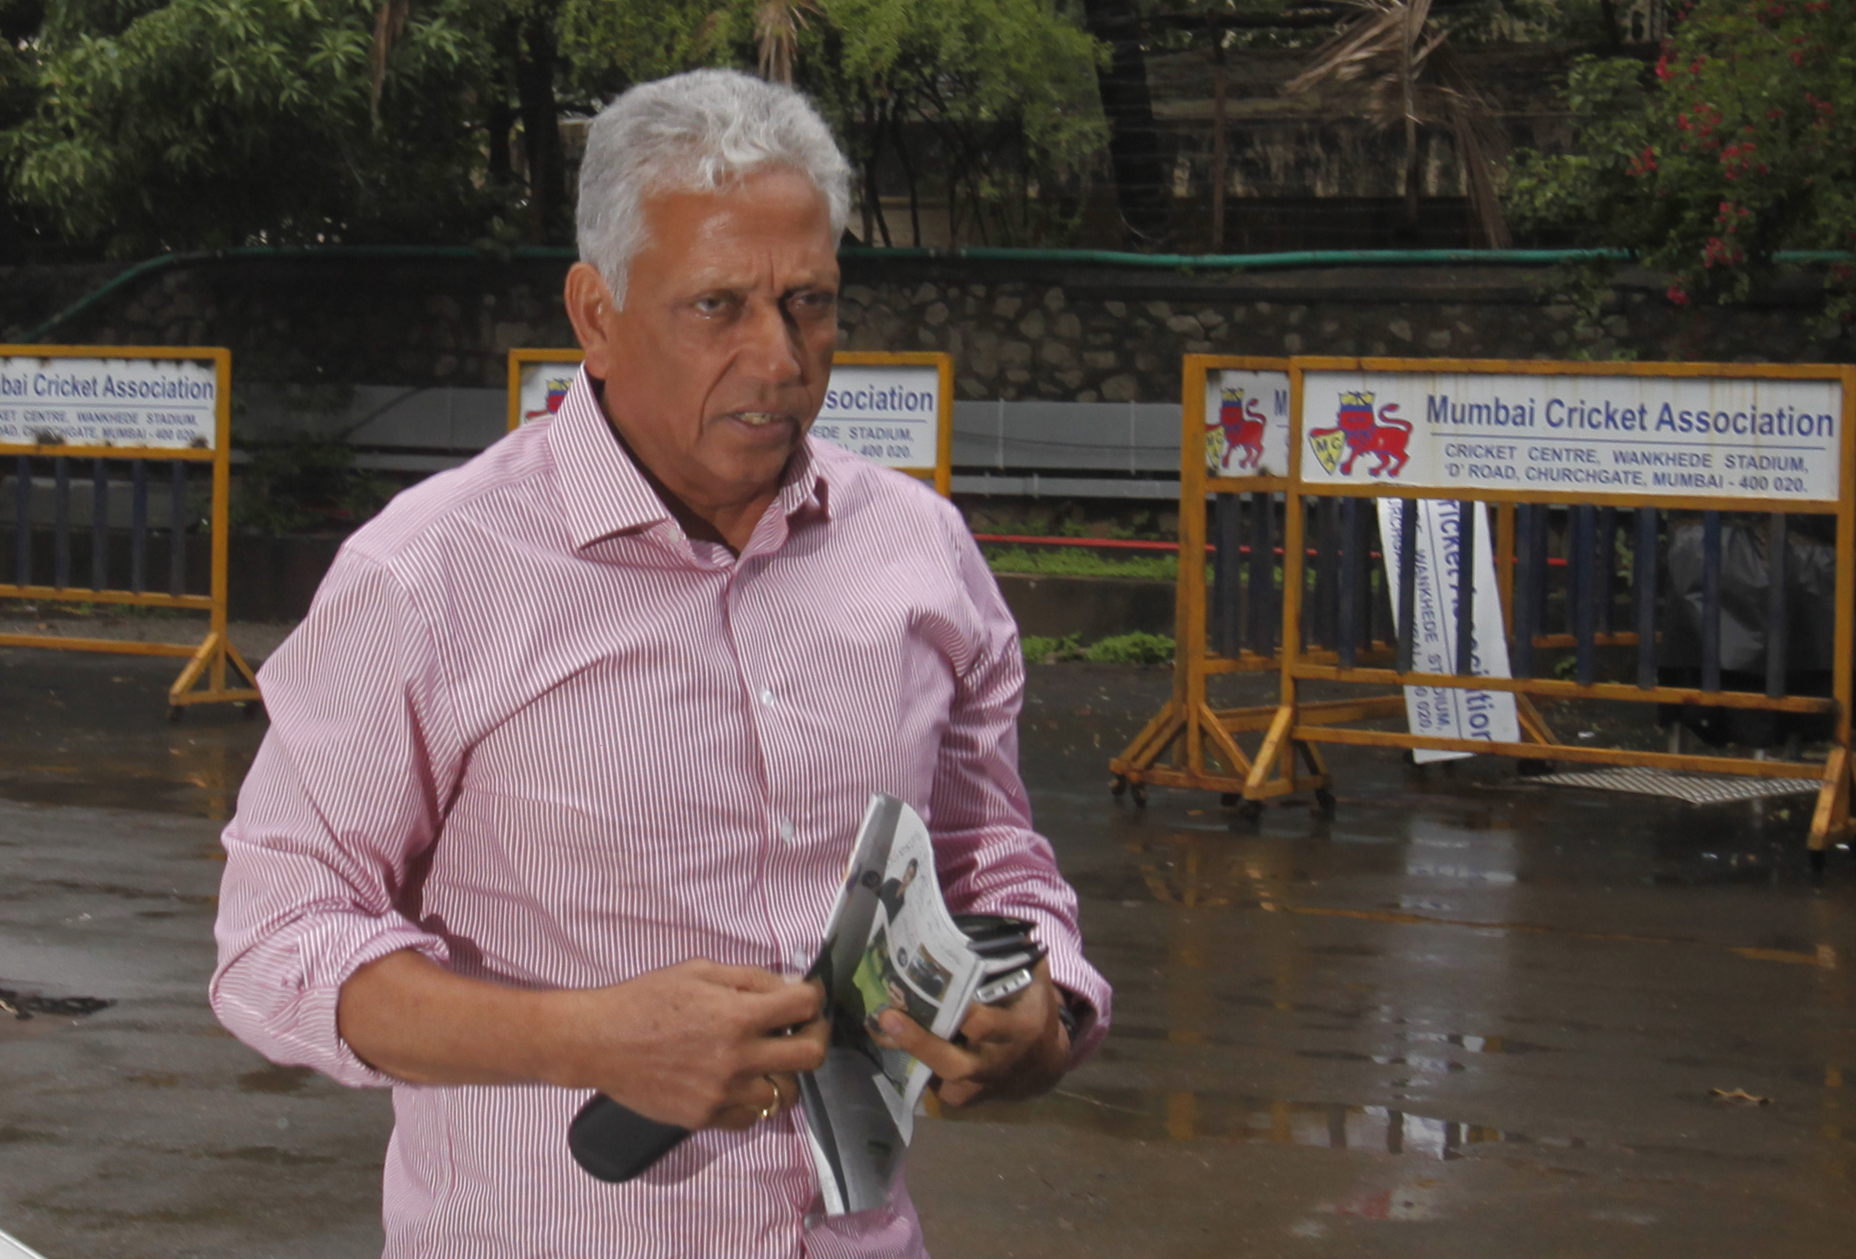 IND vs WI | Players shouldn’t be allowed to pick games, opines Mohinder Amarnath